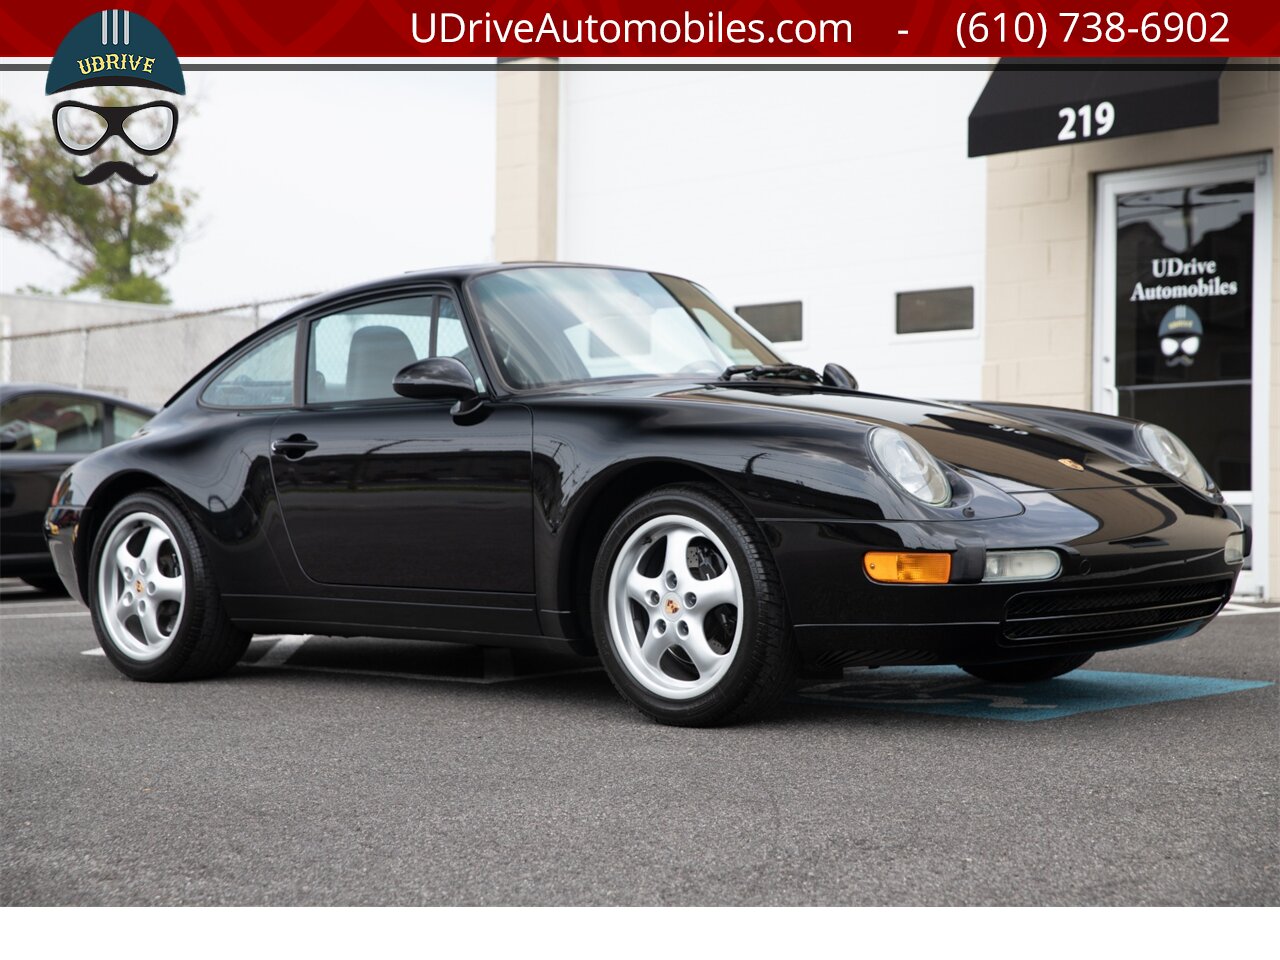 1995 Porsche 911 993 Carrera 6 Speed 16k Miles Service History  Black over Black Spectacular Stock Example 1 Owner Clean Carfax - Photo 13 - West Chester, PA 19382